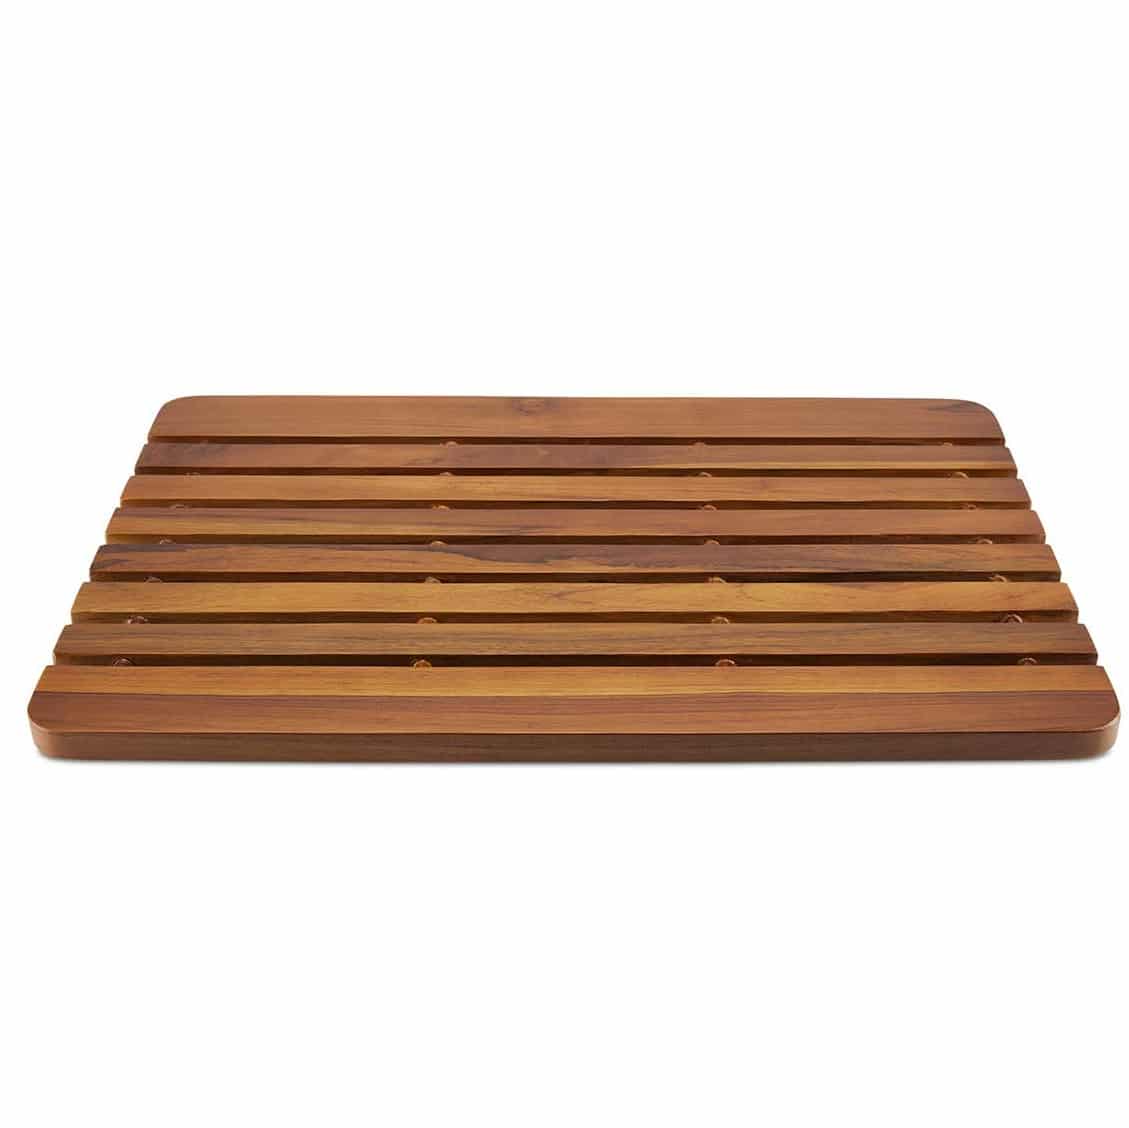 Top 10 Best Wooden Bath Mats in 2021 Reviews - Go On Products